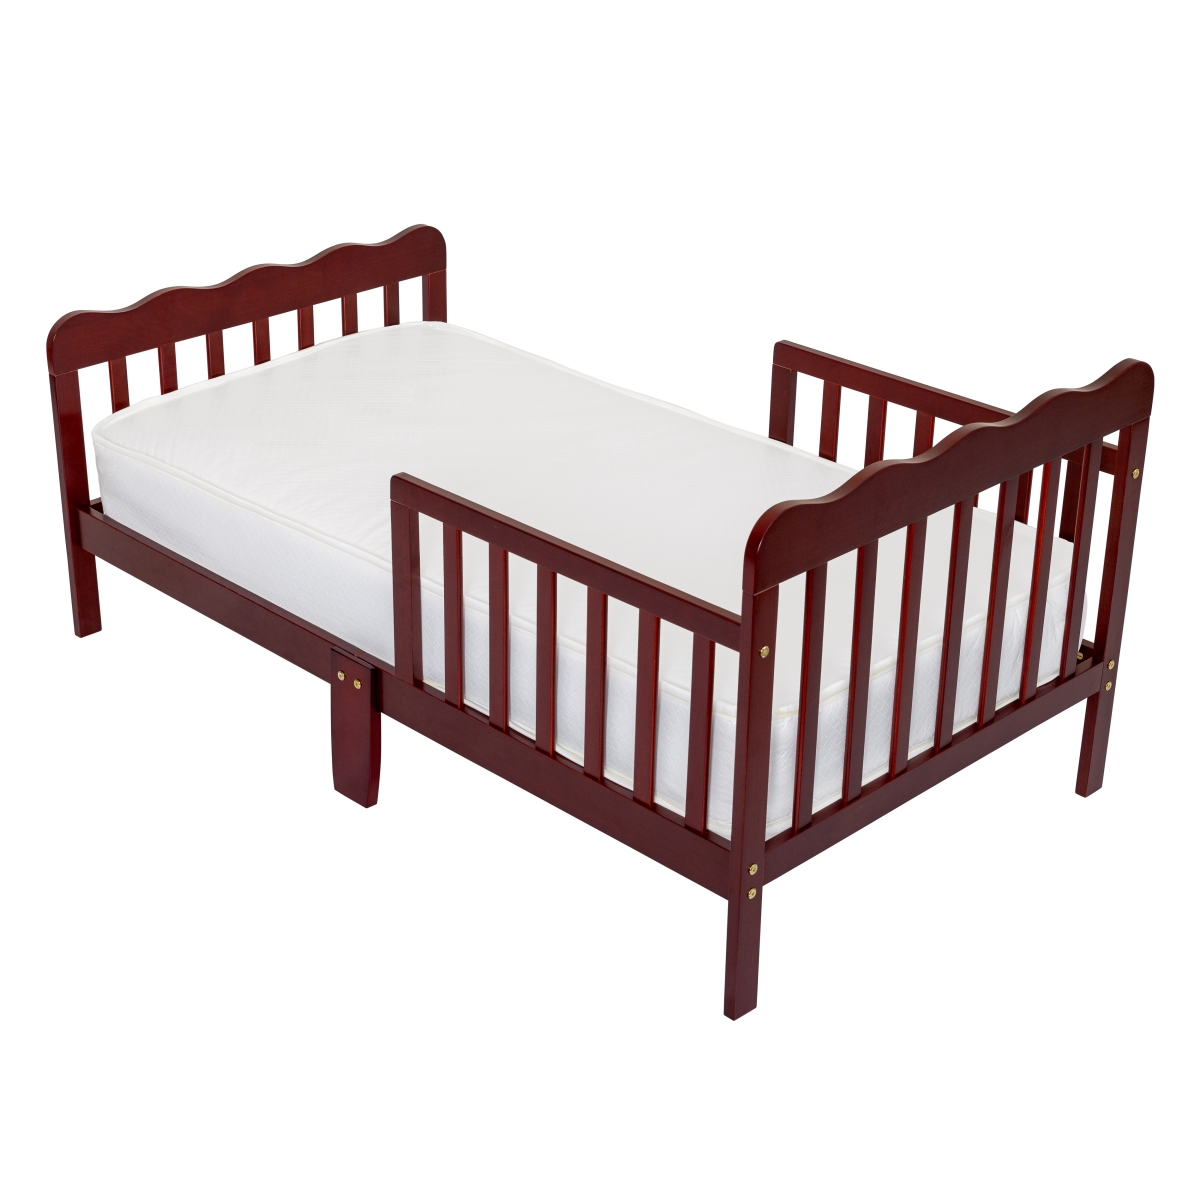 830-c Wood Toddler Bed, Cherry